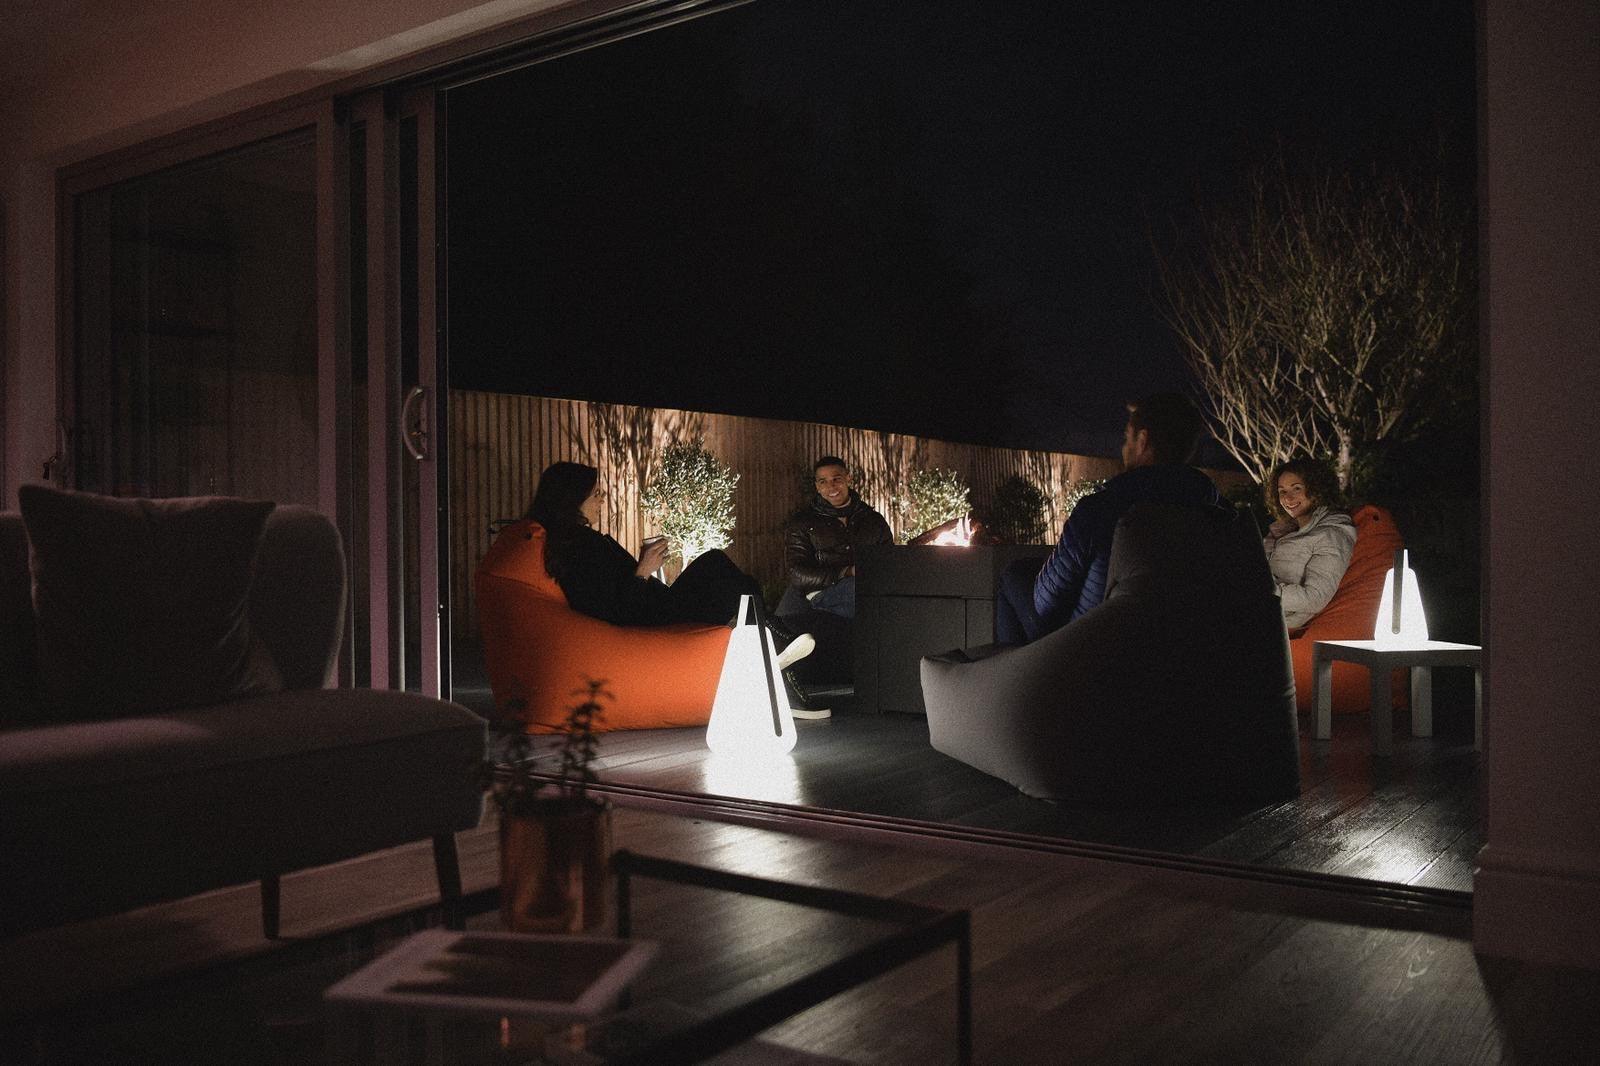 A group of people sit on bean bags around a table on a deck at night. They are illuminated by Brisks Extreme Lounging B-Bulb Outdoor Lights and string lights along a wooden fence in the background. The setting appears cozy and intimate. Some indoor furniture is partially visible in the foreground.